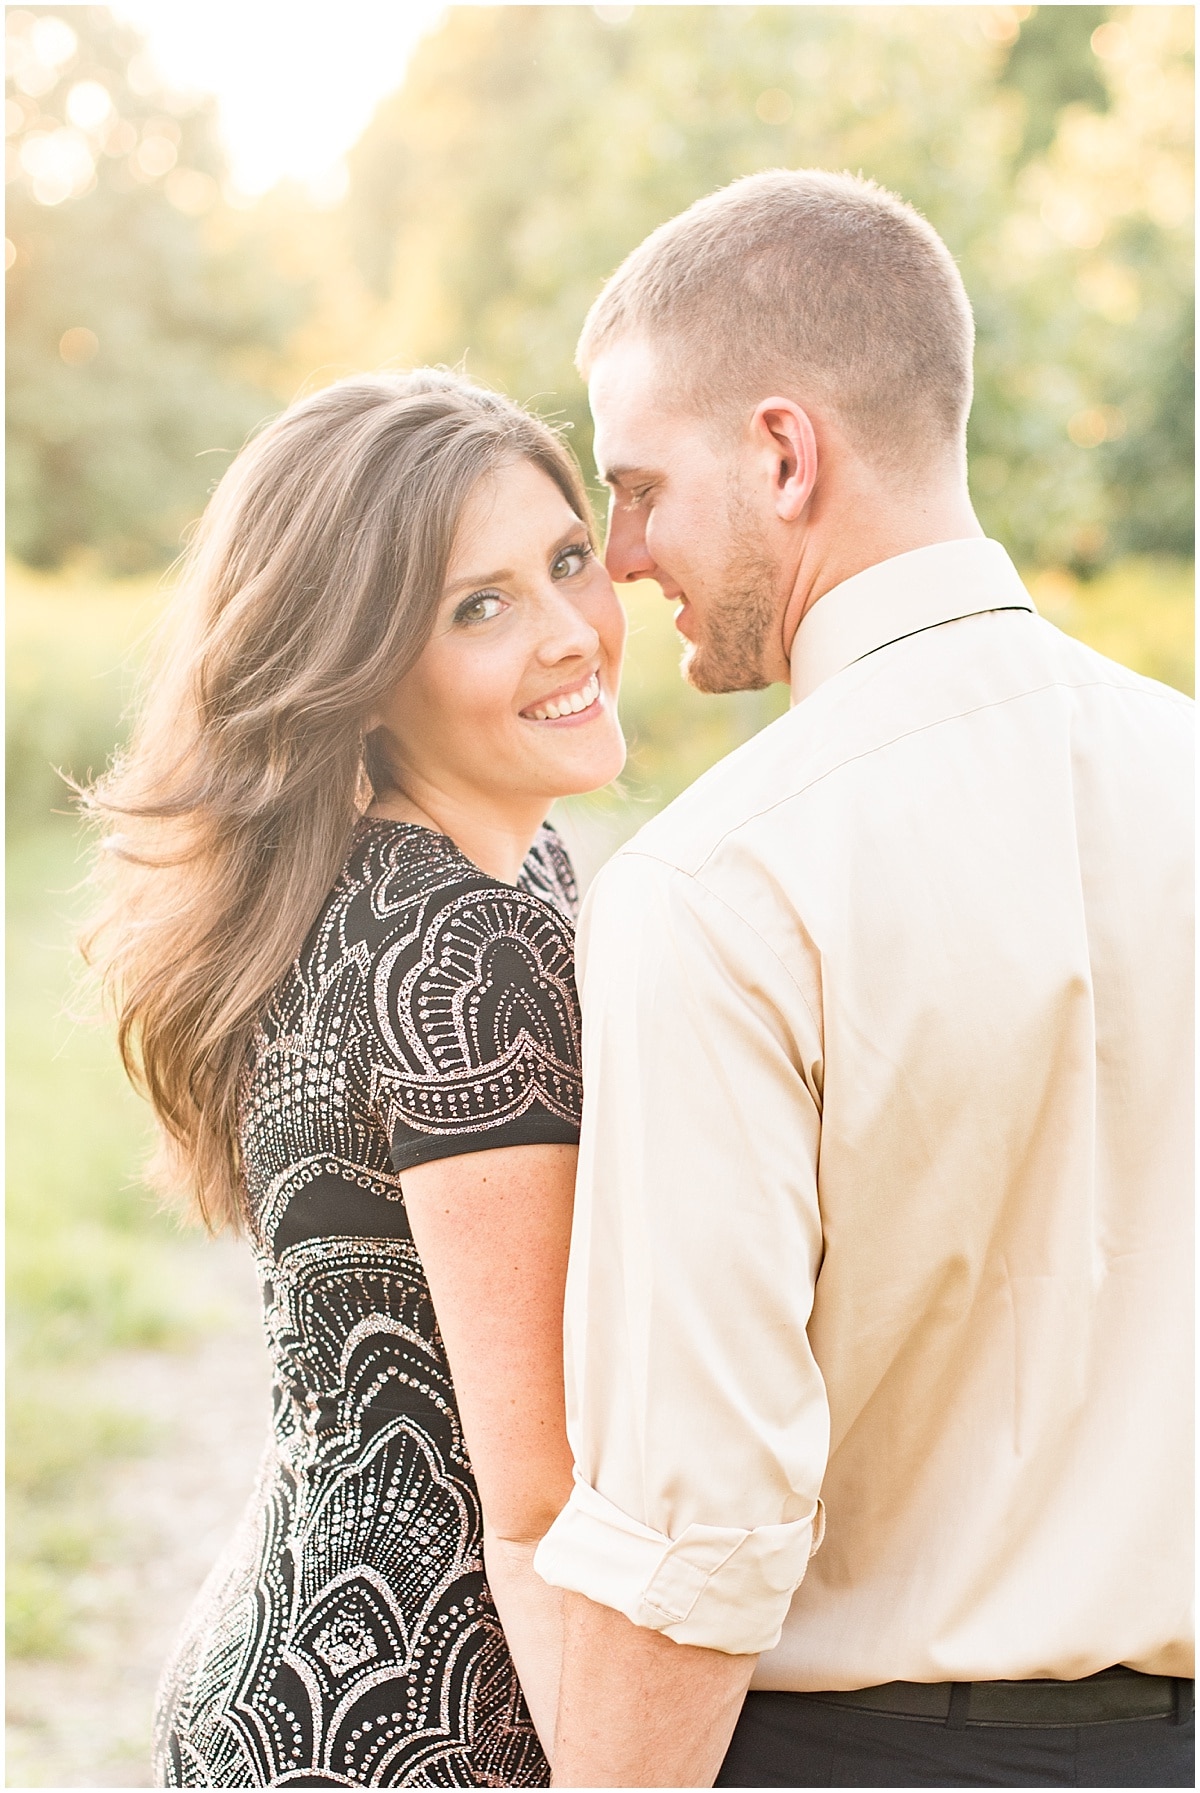 Lafayette, Indiana wedding photographer Victoria Rayburn took Celery Bog engagement photos for Kerry and Kelsey.